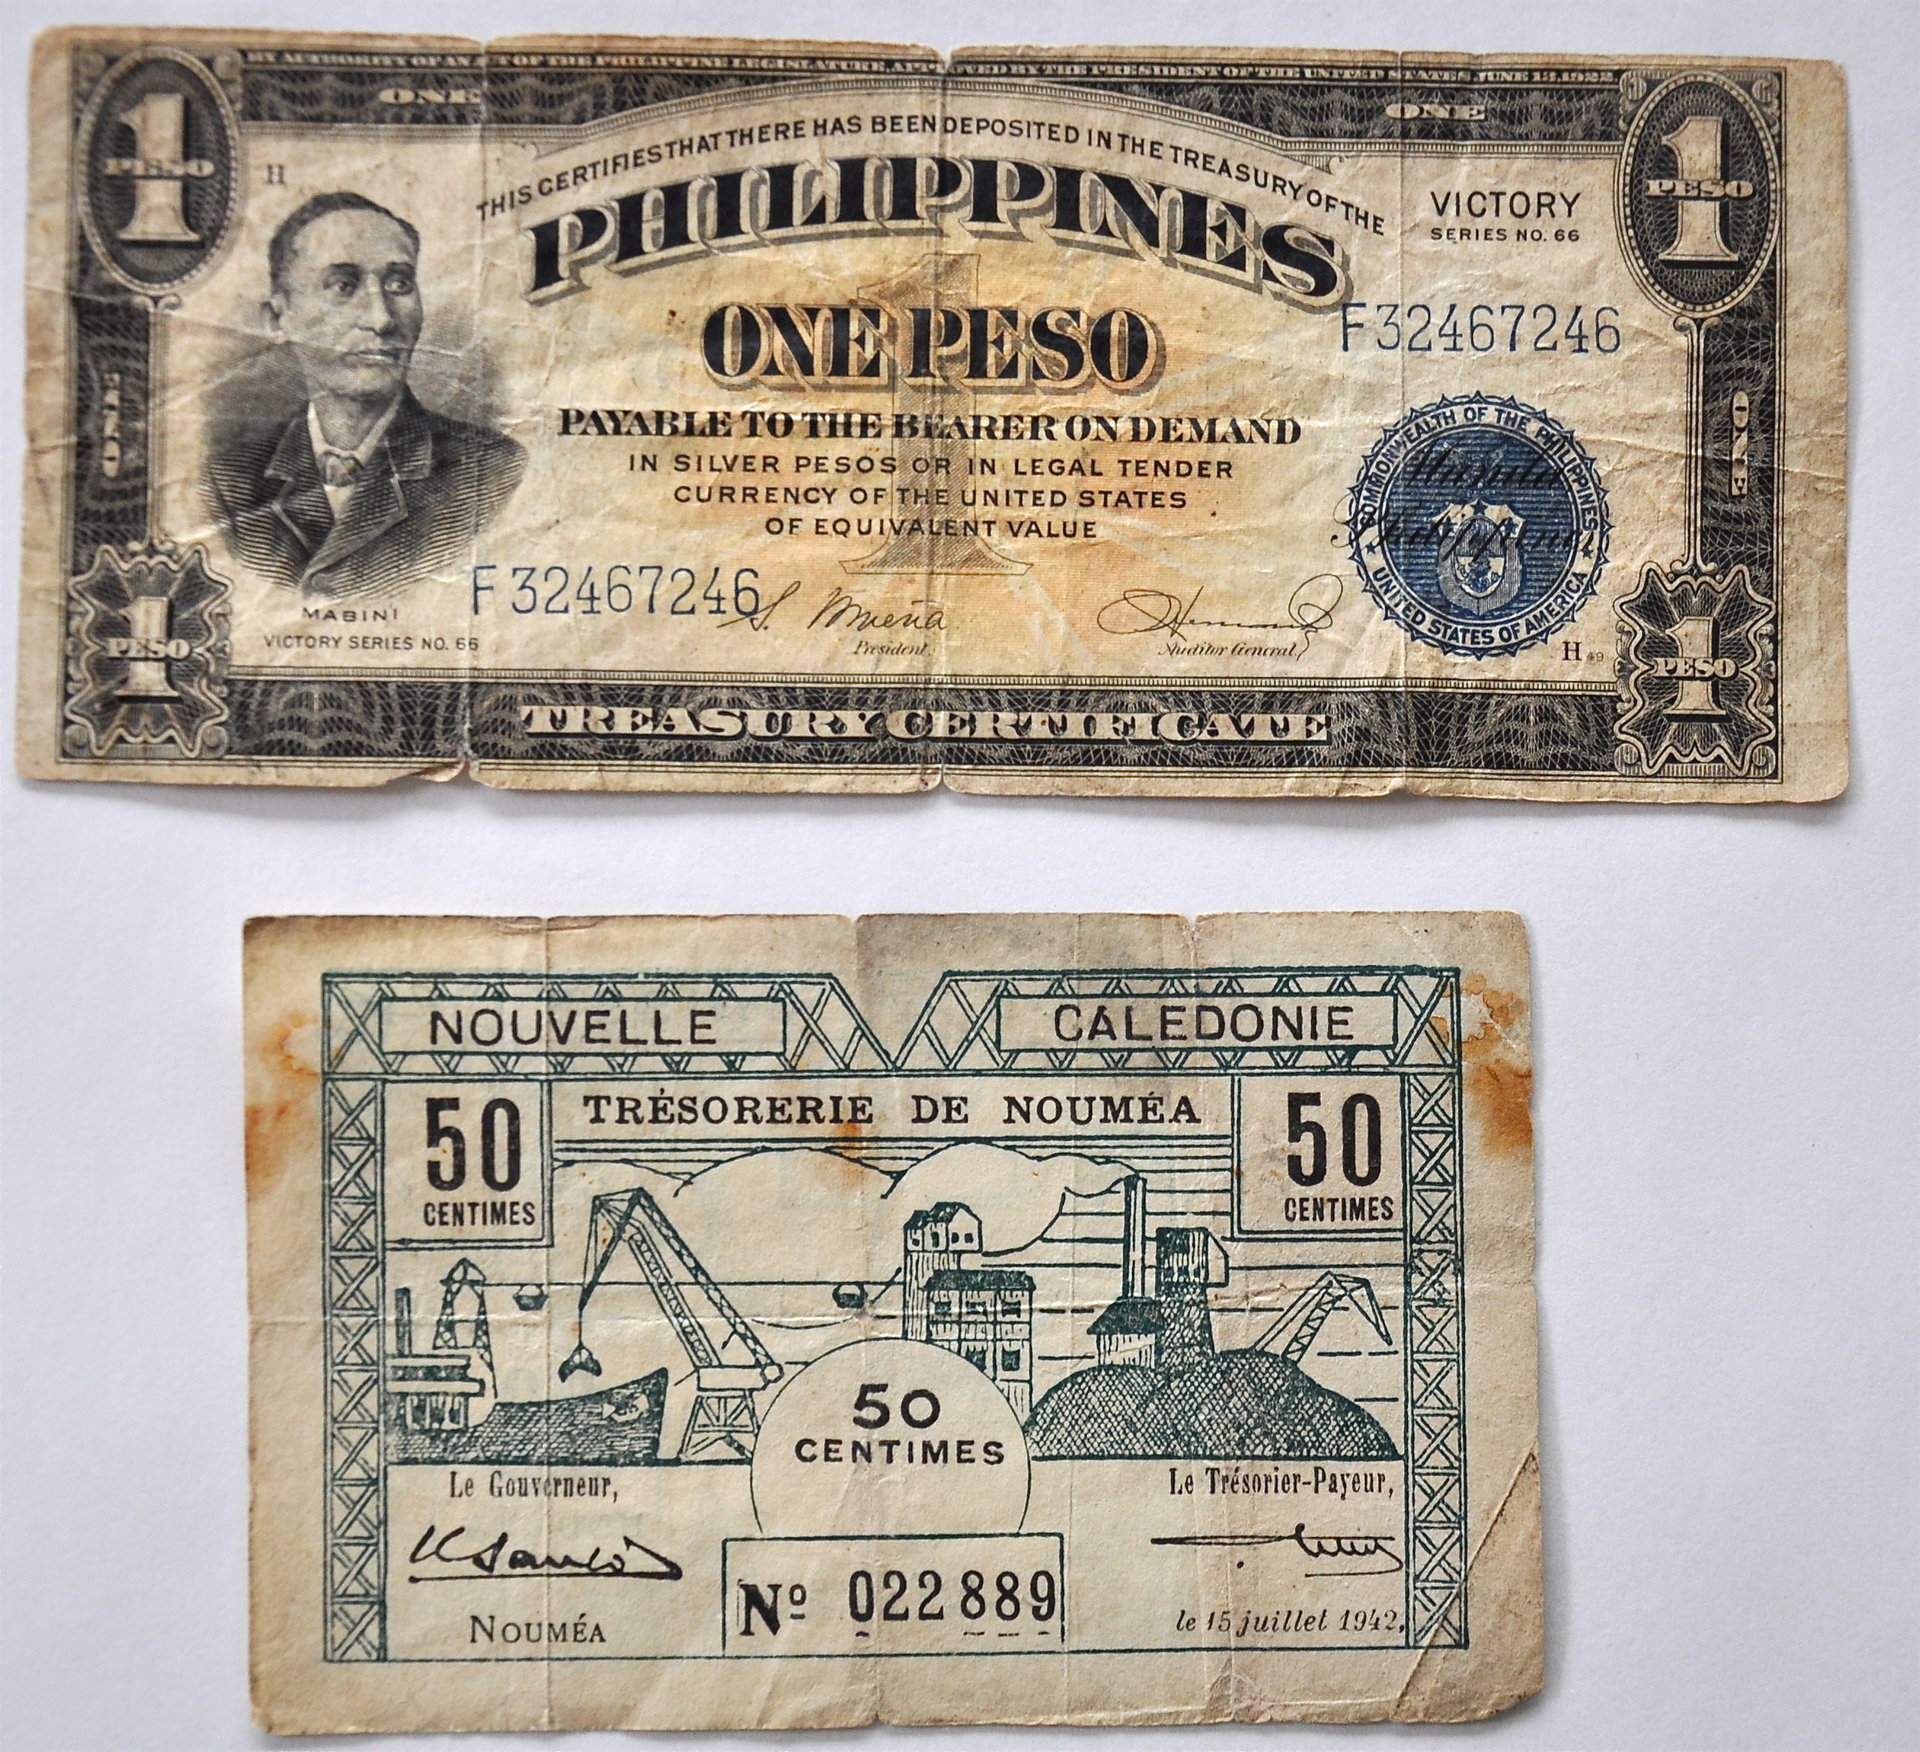 Philippines Victory Peso&New Caledonia centimes.jpg